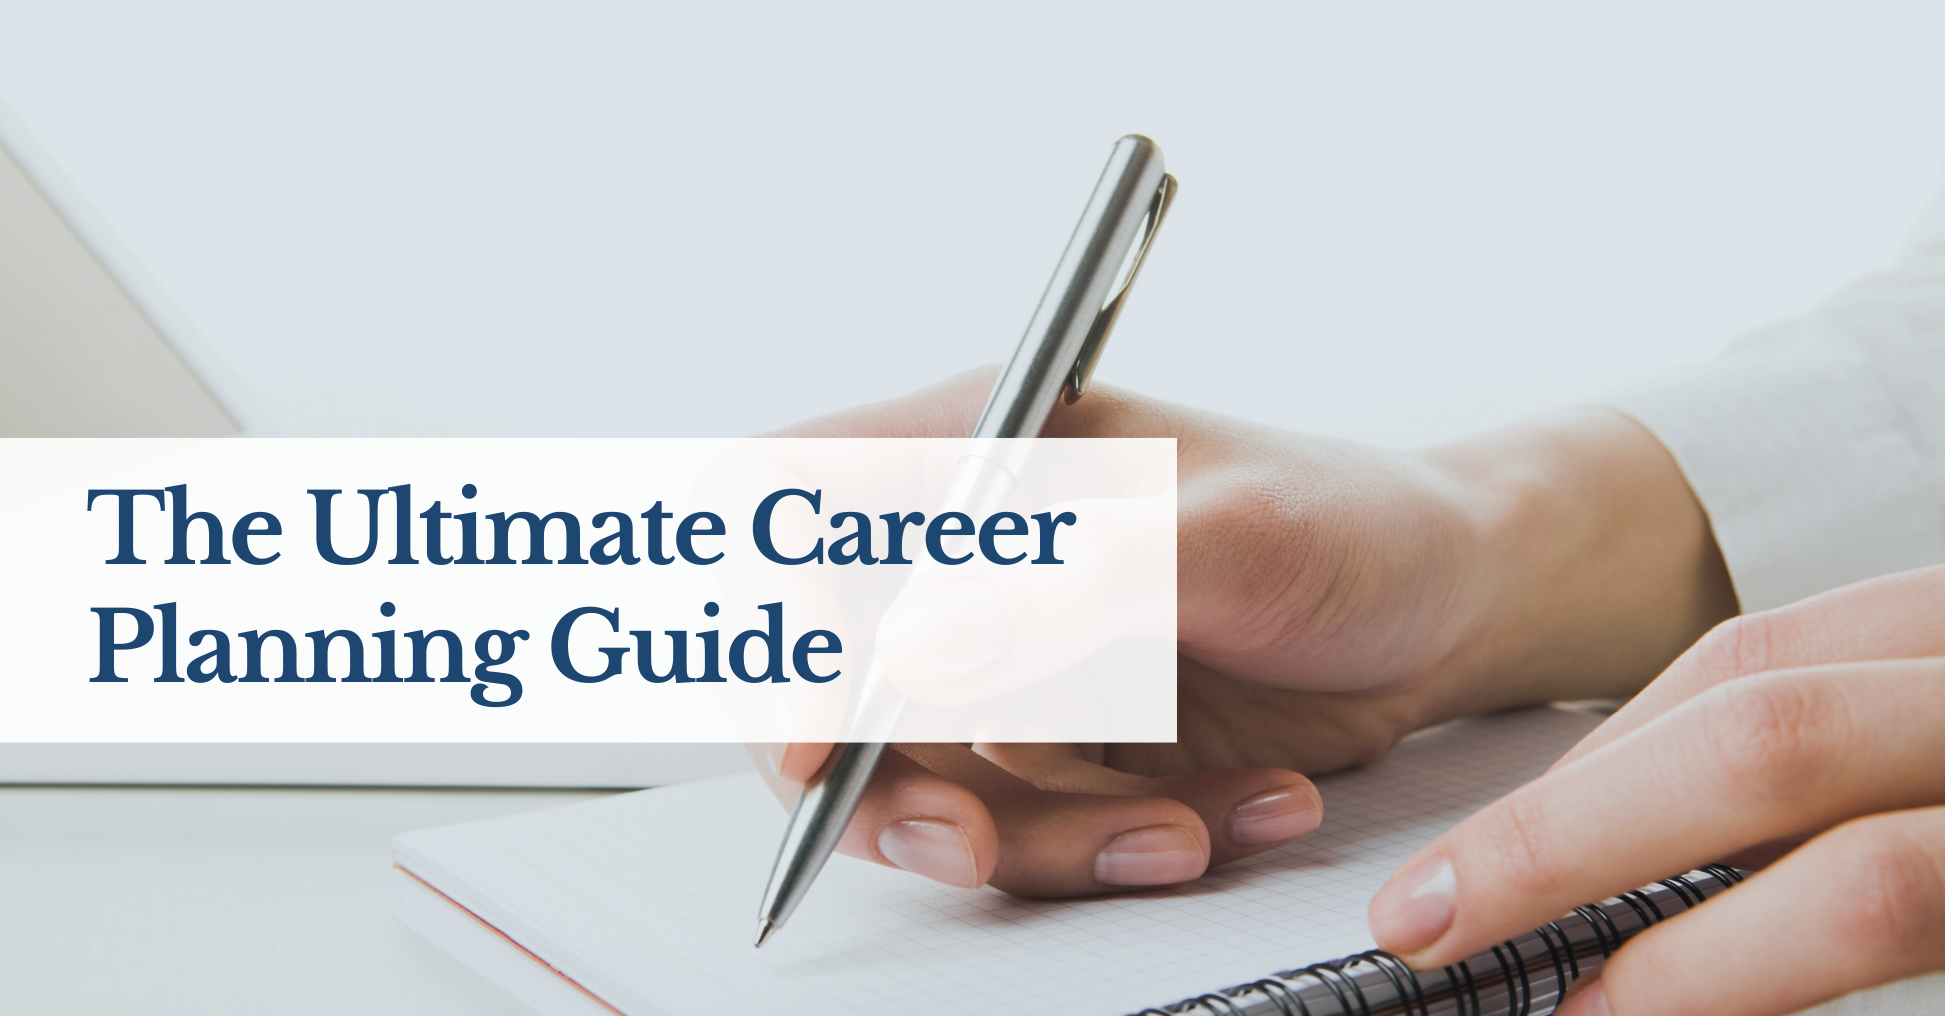 The Ultimate Career Planning Guide